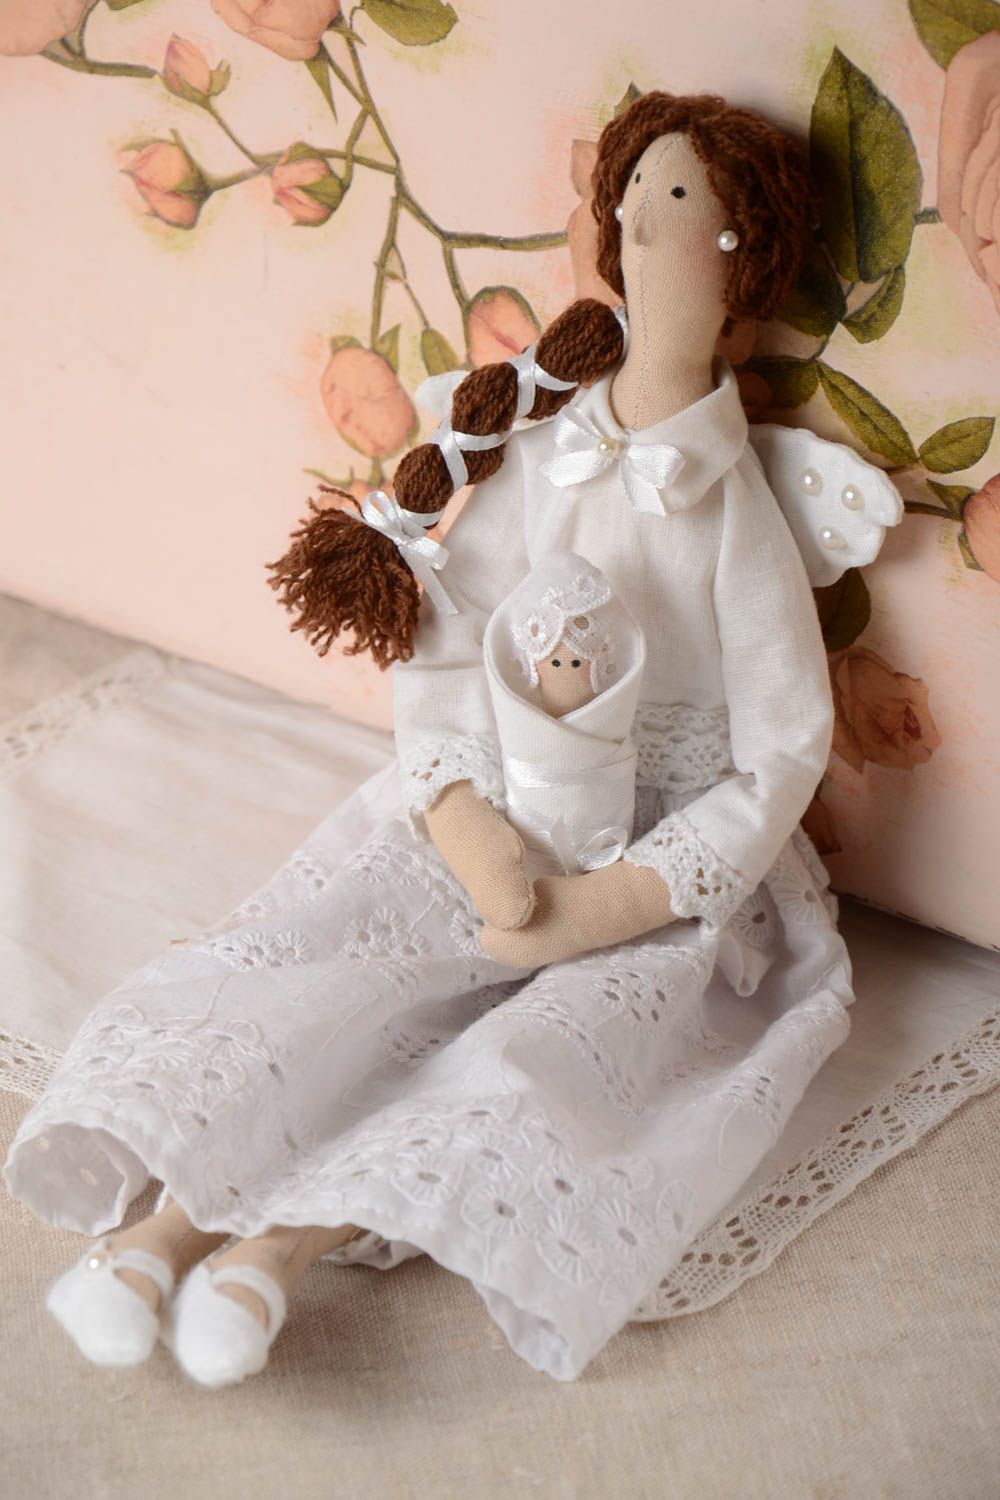 Beautiful handmade interior fabric doll decorative soft toy gifts for her photo 1